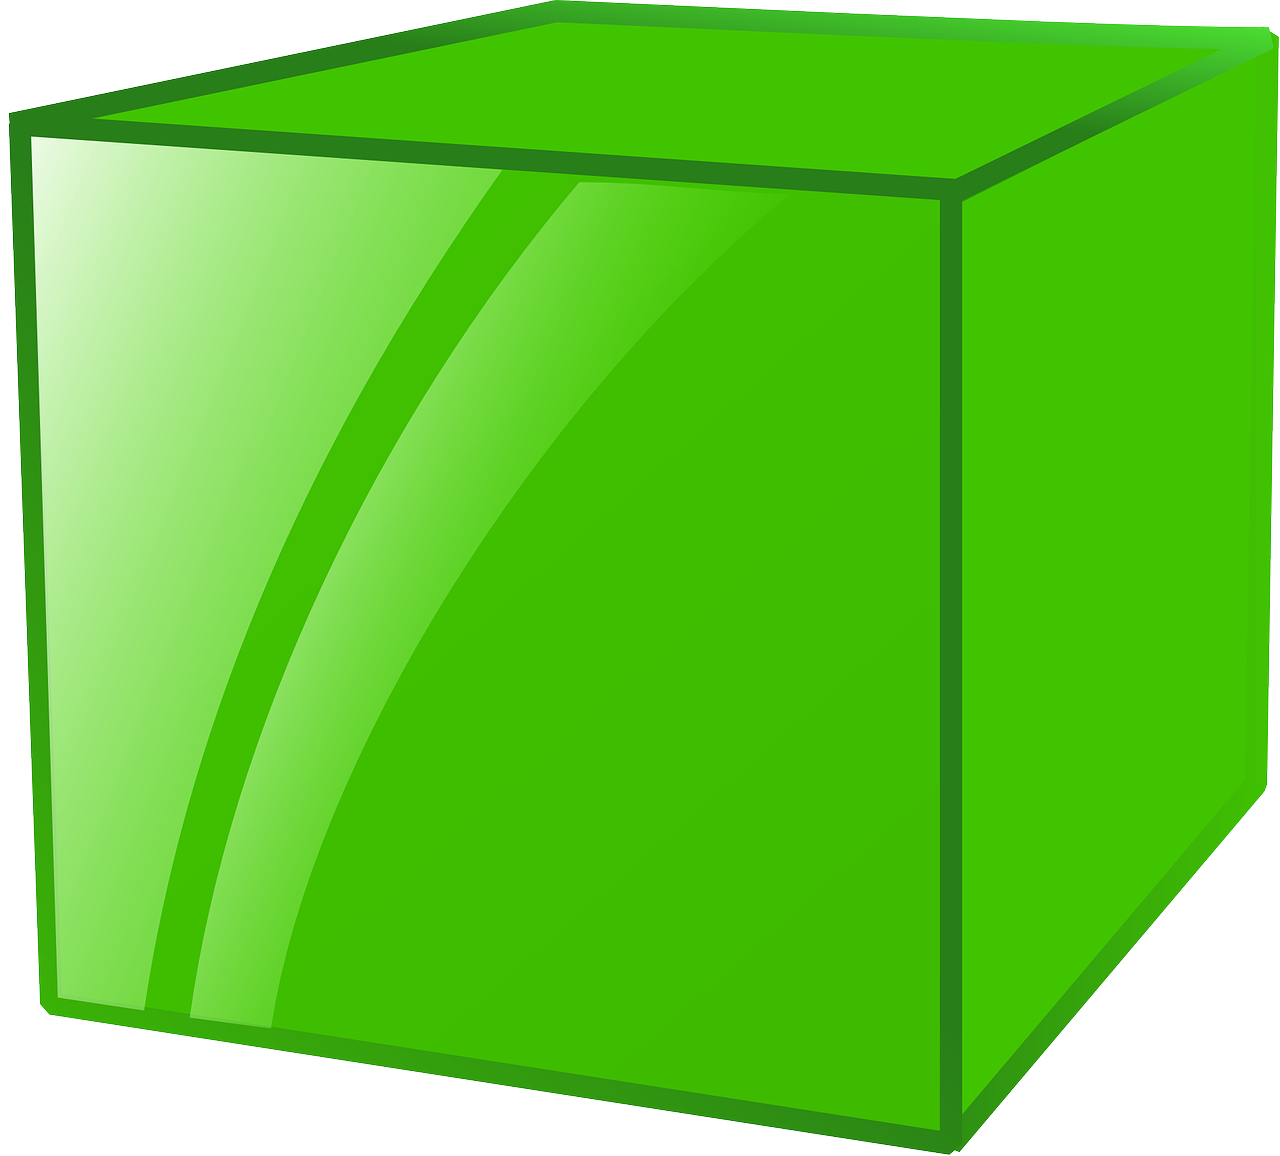 a green box on a white background, a computer rendering, by Taiyō Matsumoto, deviantart, crystal cubism, everyday plain object, vector, lacquered glass, yard